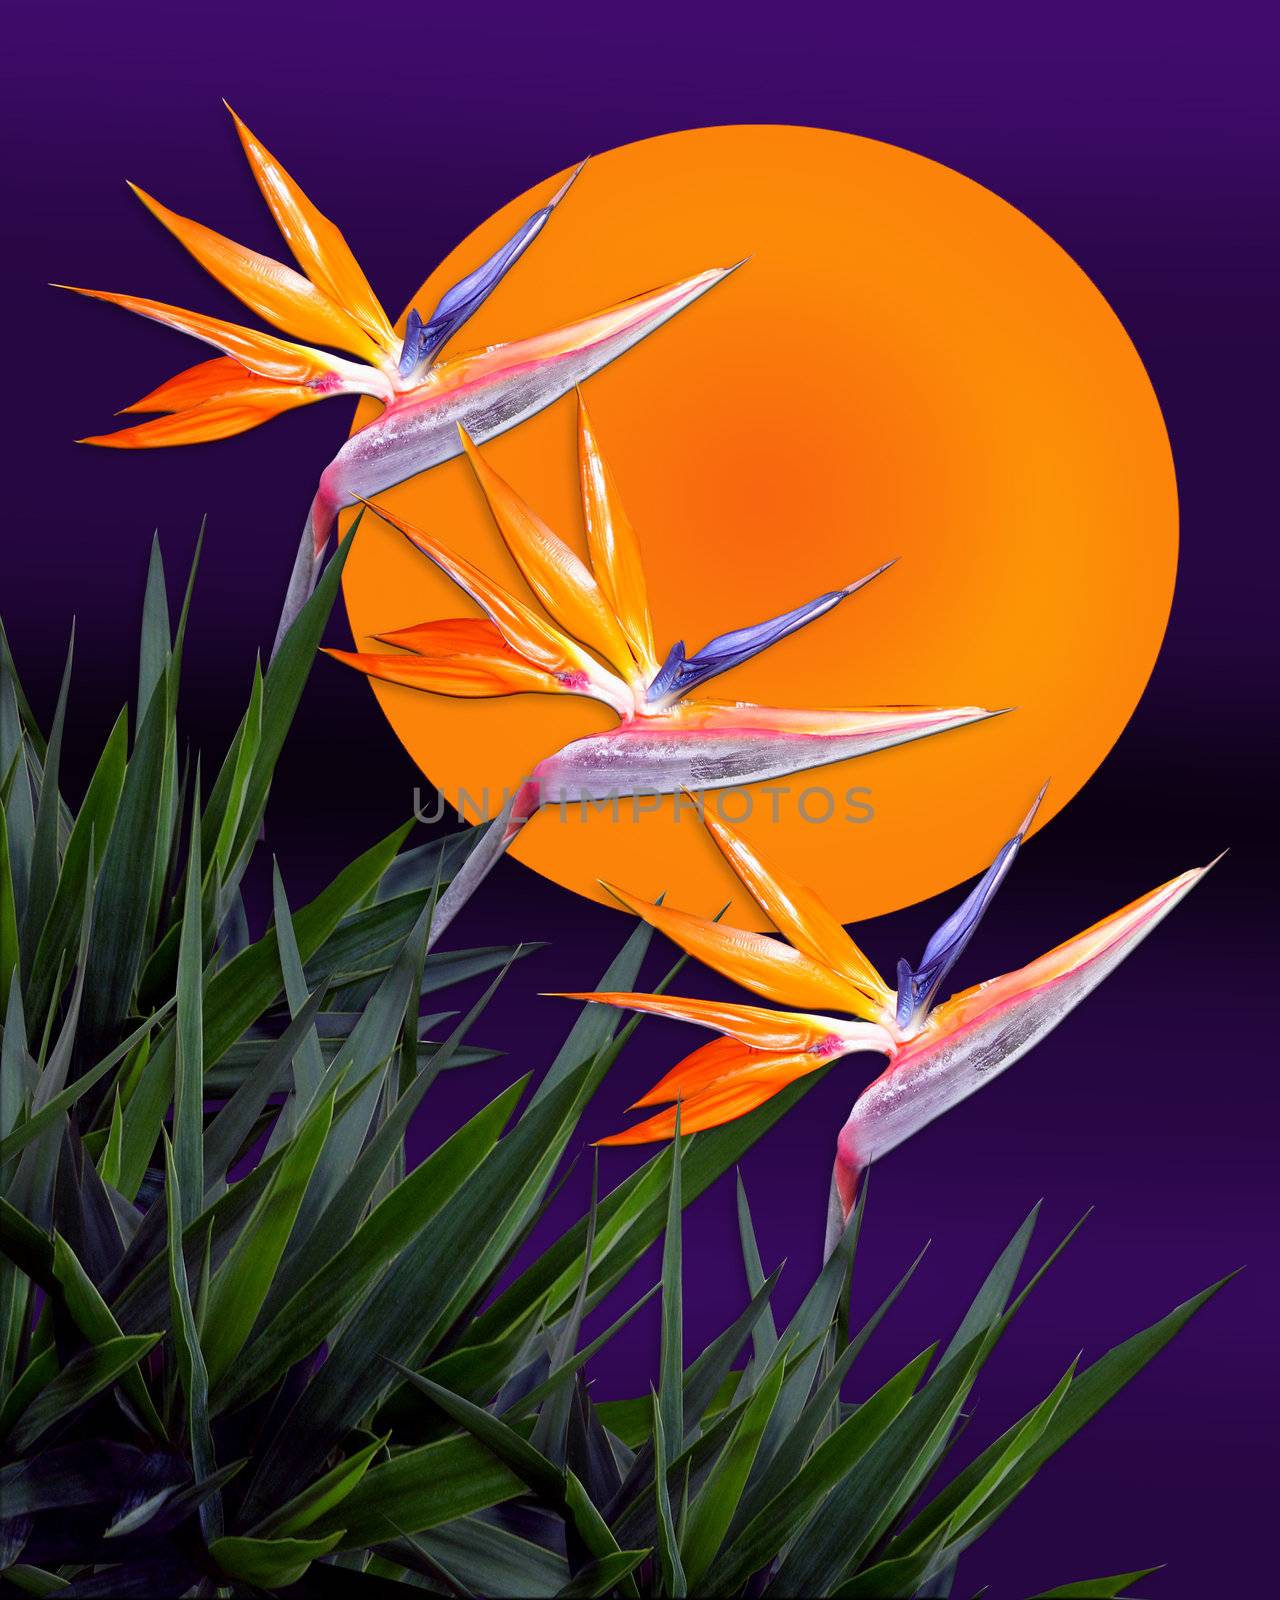 Image and illustration composition of  bird of Paradise flowers against illustrated sun on dark sky for Hawaiian luau or tropical background